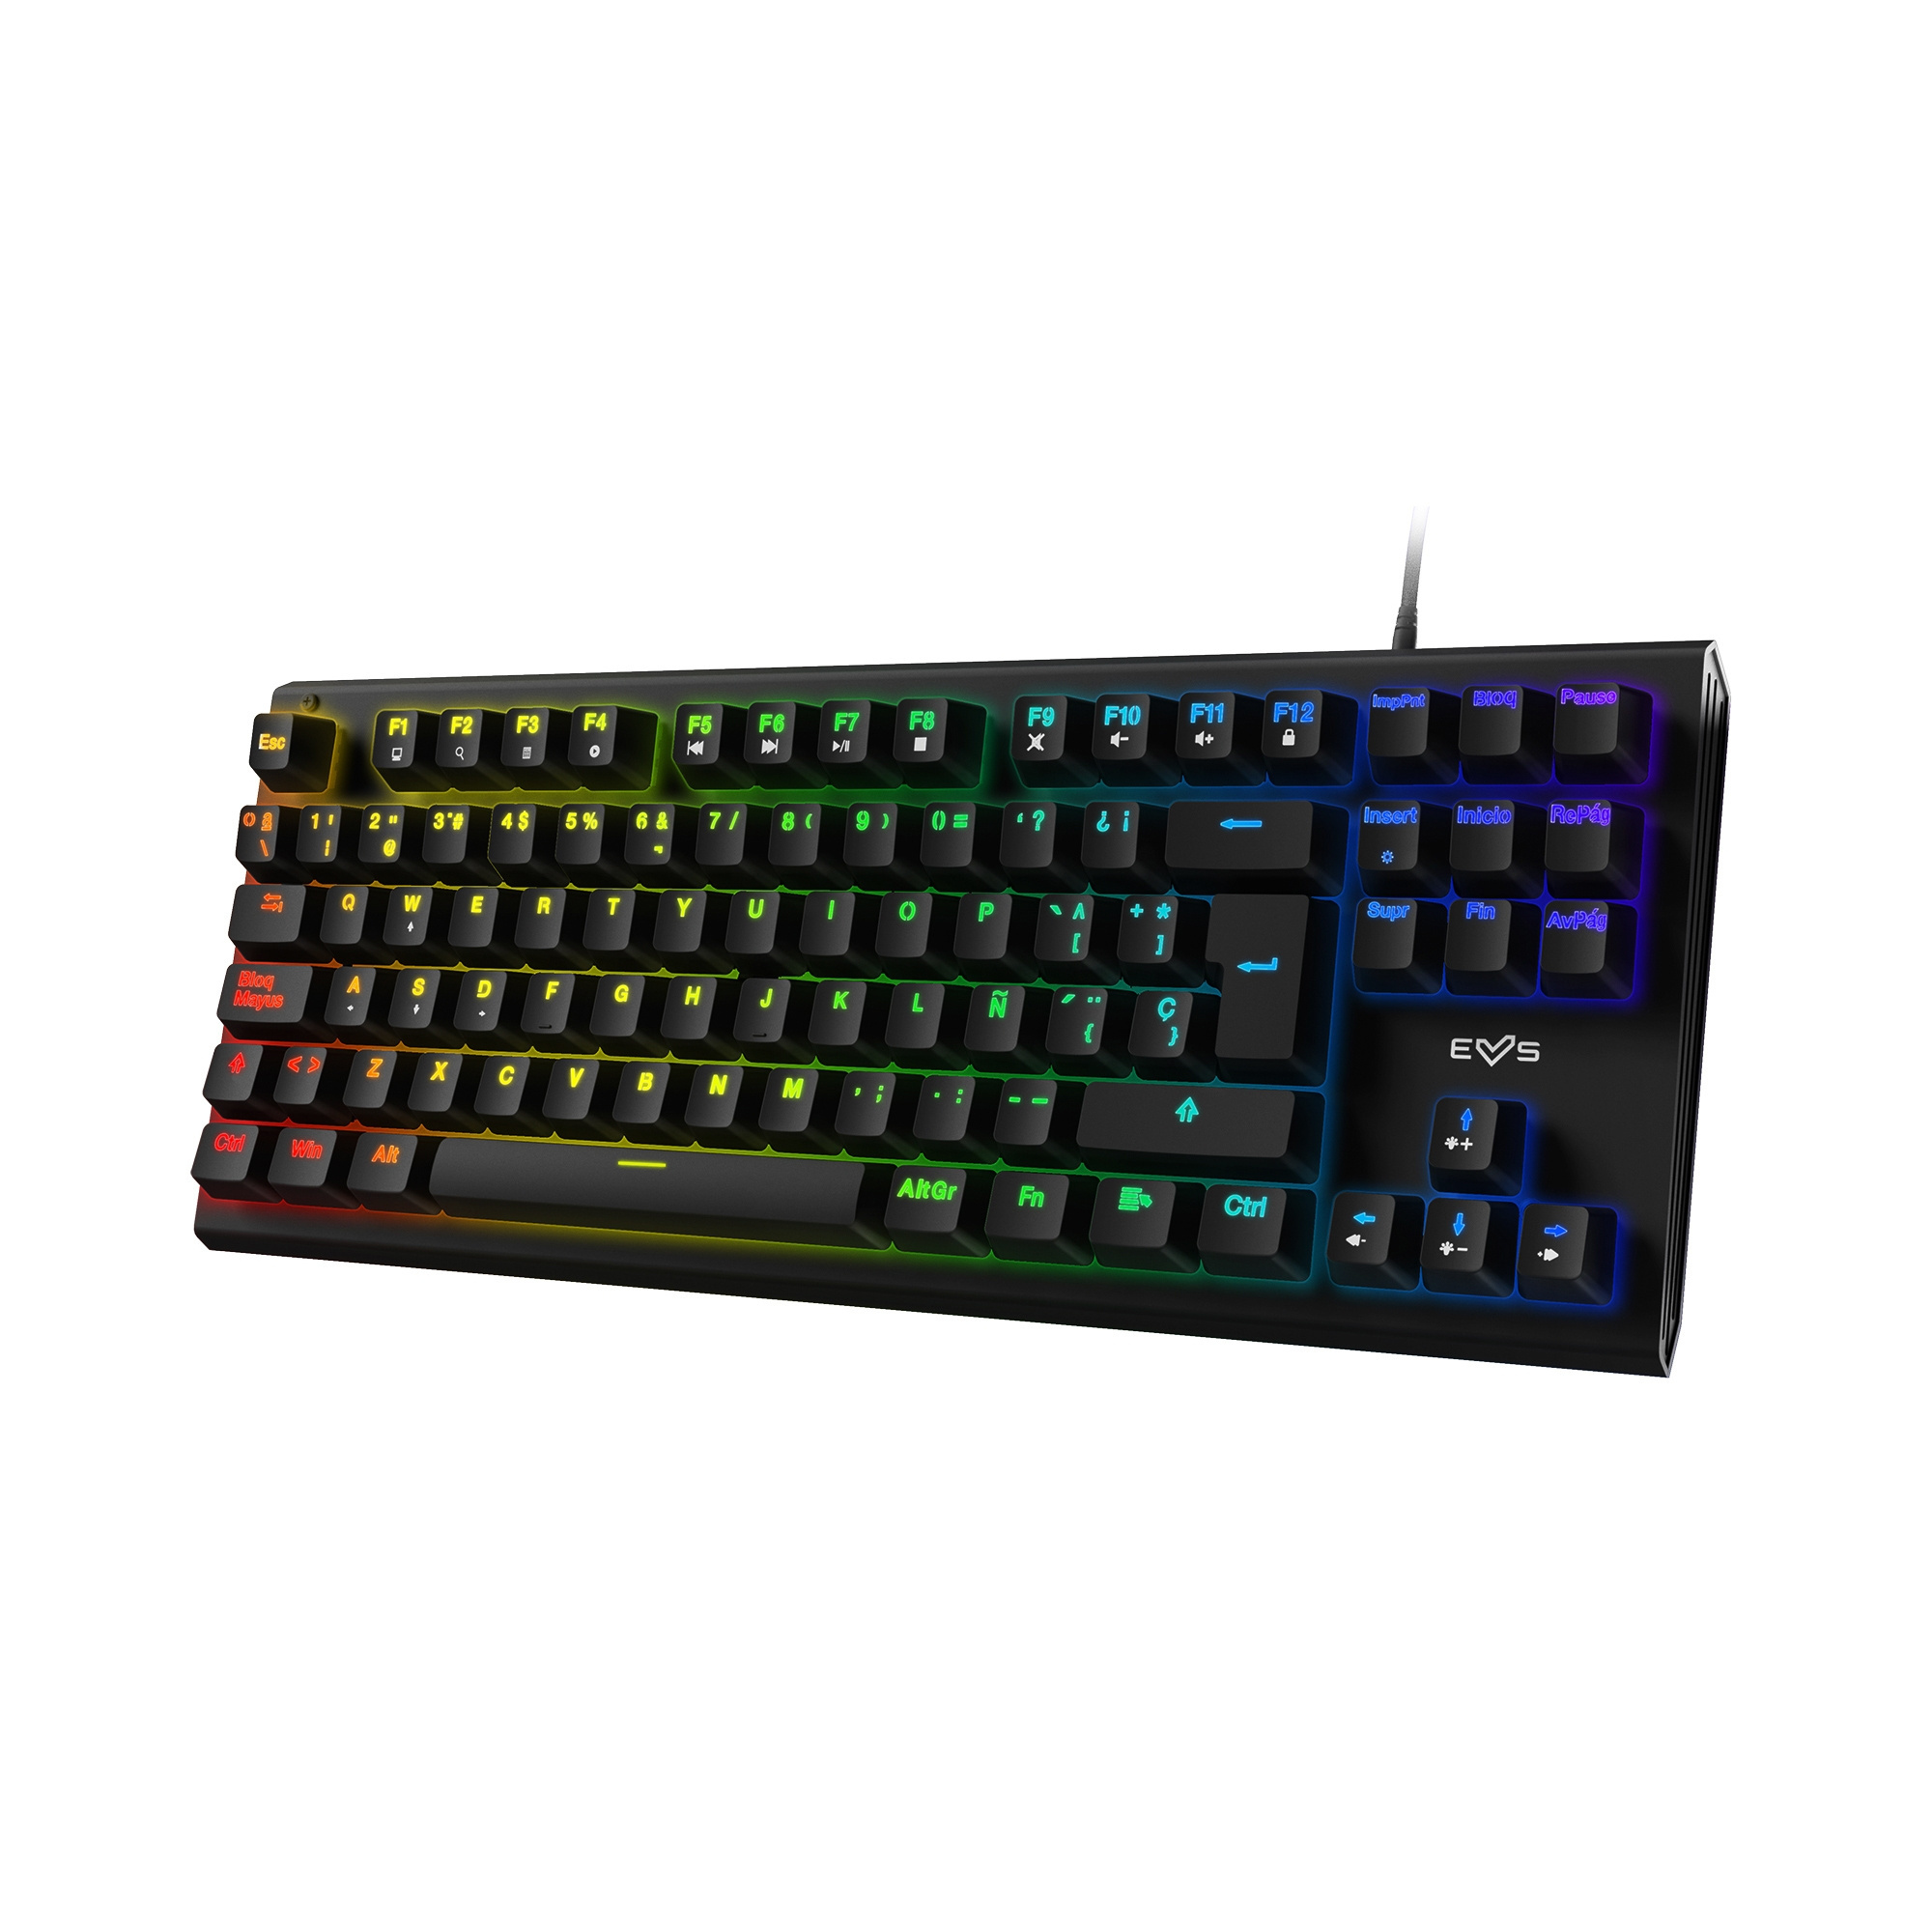 TKL keyboard perfect for gaming and typing for hours